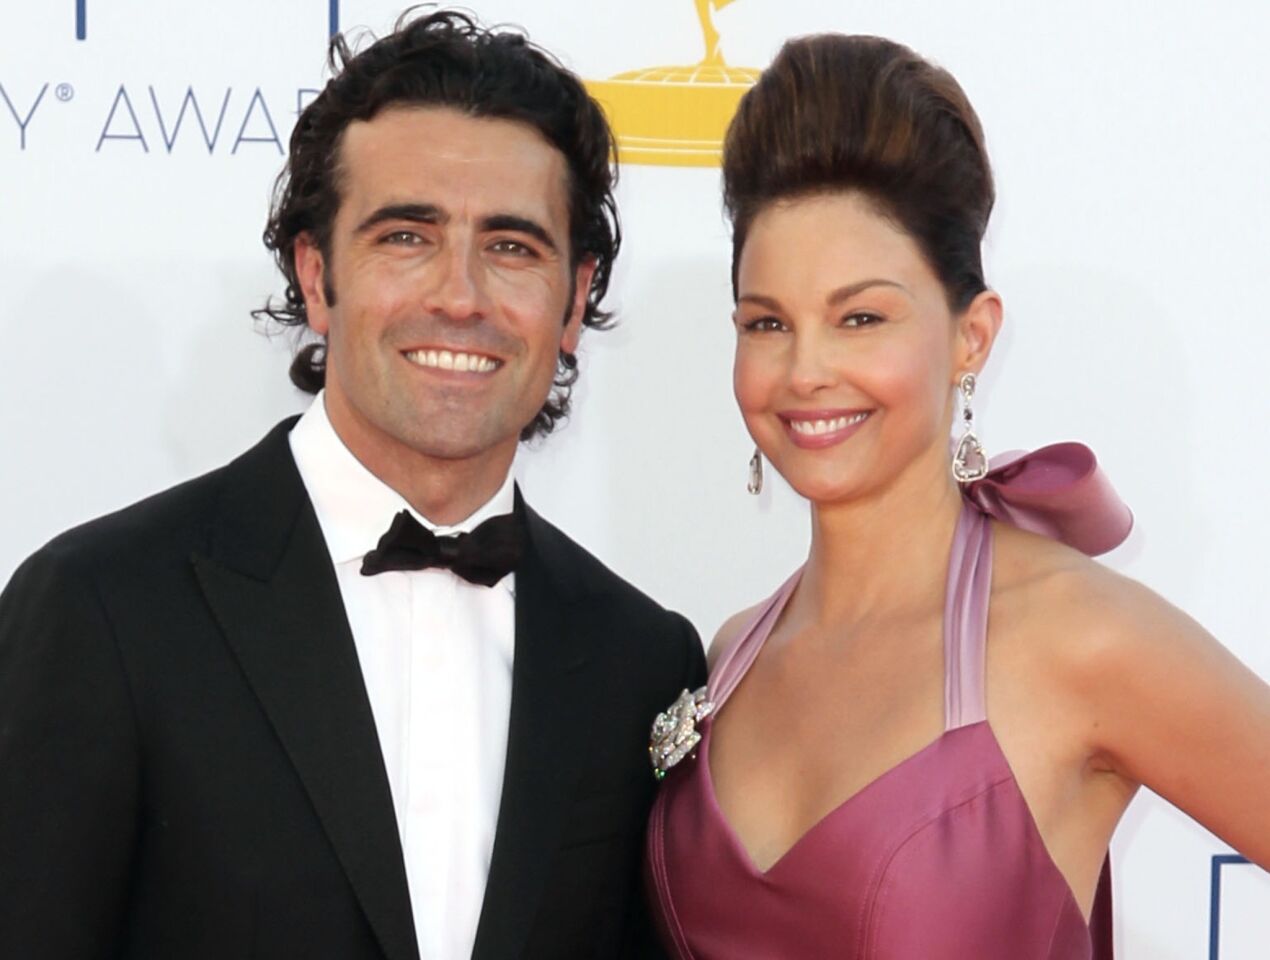 Ashley Judd and IndyCar driver Dario Franchitti called it quits at the end of January after more than 11 years of marriage. The decision was mutual, the couple said in a statement to People. "We'll always be family and continue to cherish our relationship based on the special love, integrity, and respect we have always enjoyed," they said. Judd, 44, and Franchitti, 39, married in 2001 in his native Scotland after a two-year engagement. MORE: Ashley Judd and racecar-driver hubby Dario Franchitti split up